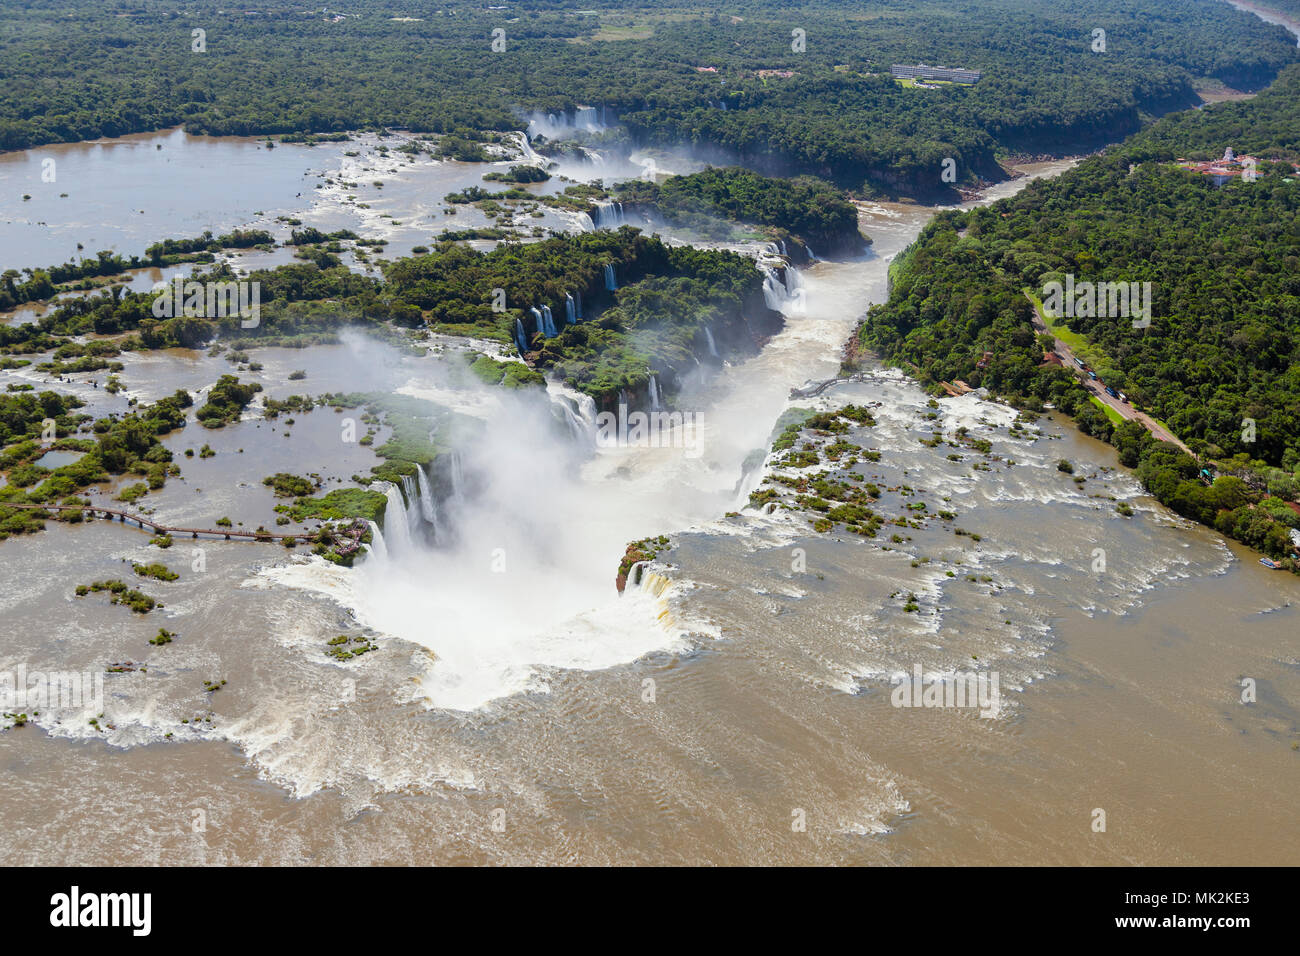 Aerial view of the Iguassu or Iguacu falls - the world's biggest waterfall system on the border of Brazil an Argentina Stock Photo